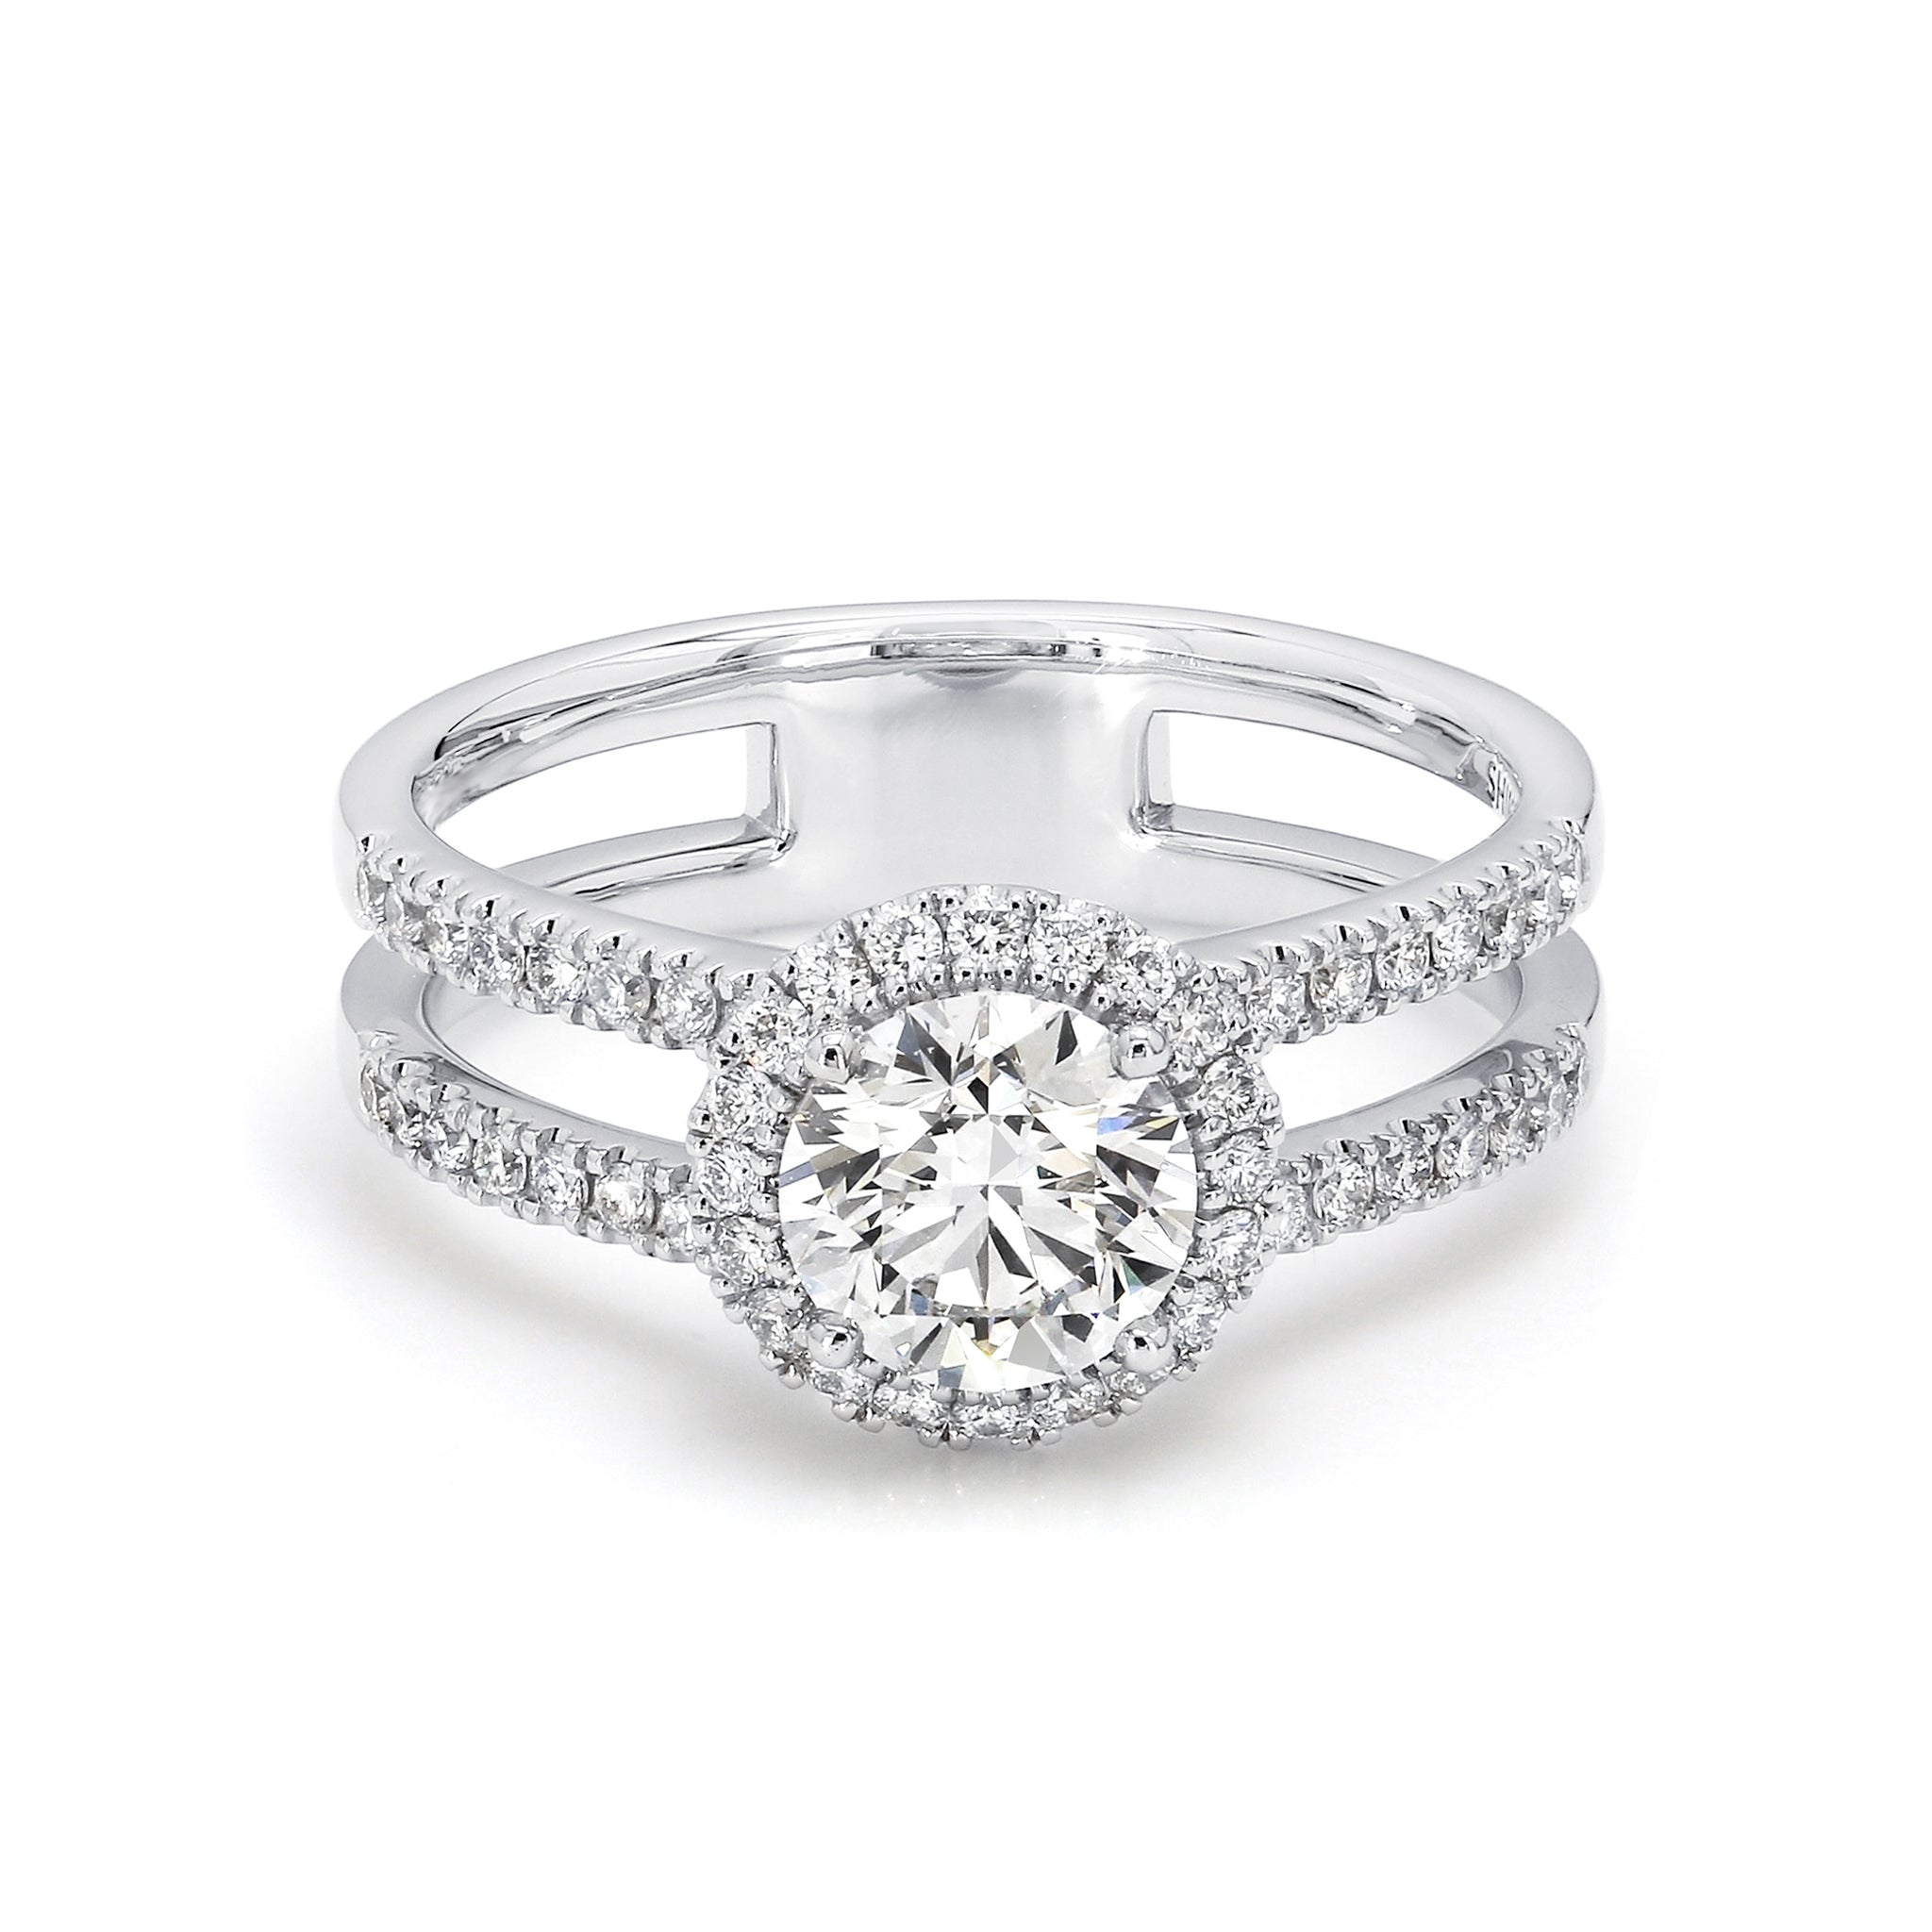 Shimansky - Diamond Microset Double Band Halo Ring 1.00ct crafted in 18K White Gold